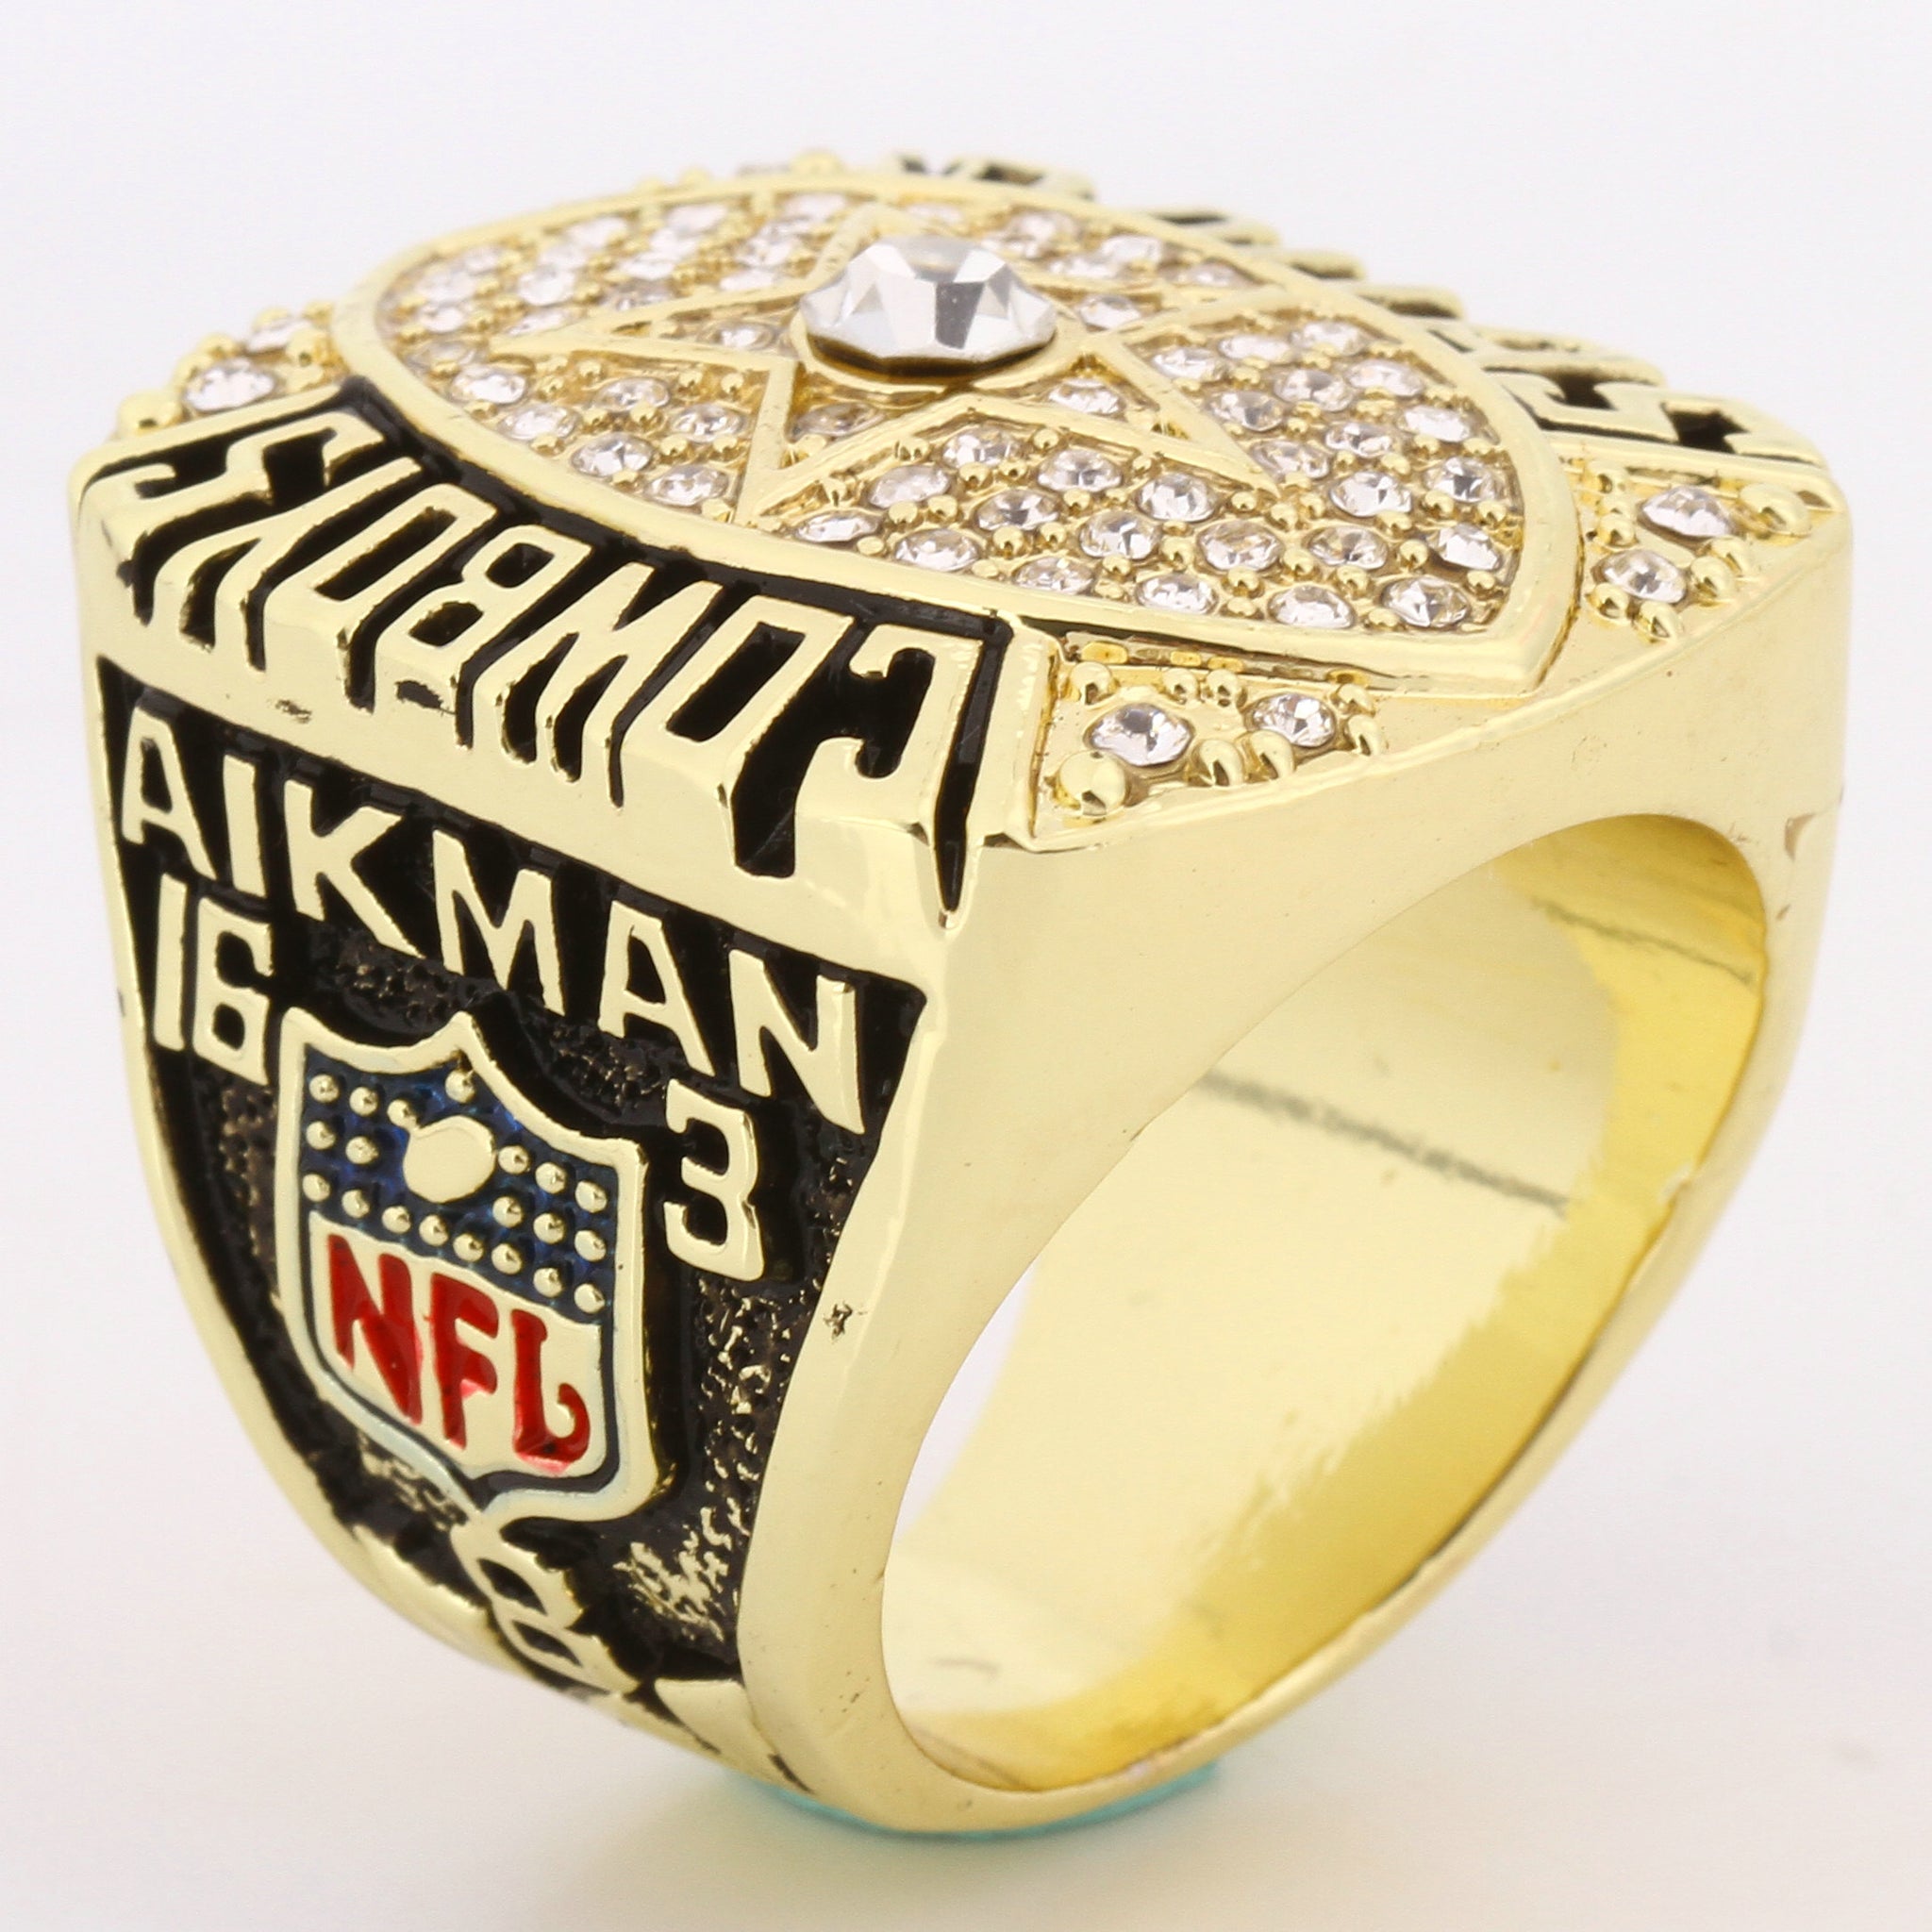 April 27, 2018: A Dallas Cowboys fan shows off 5 replica Super Bowl rings  for each of the Cowboys championship victories during the second round of  the 2018 NFL Draft at AT&T